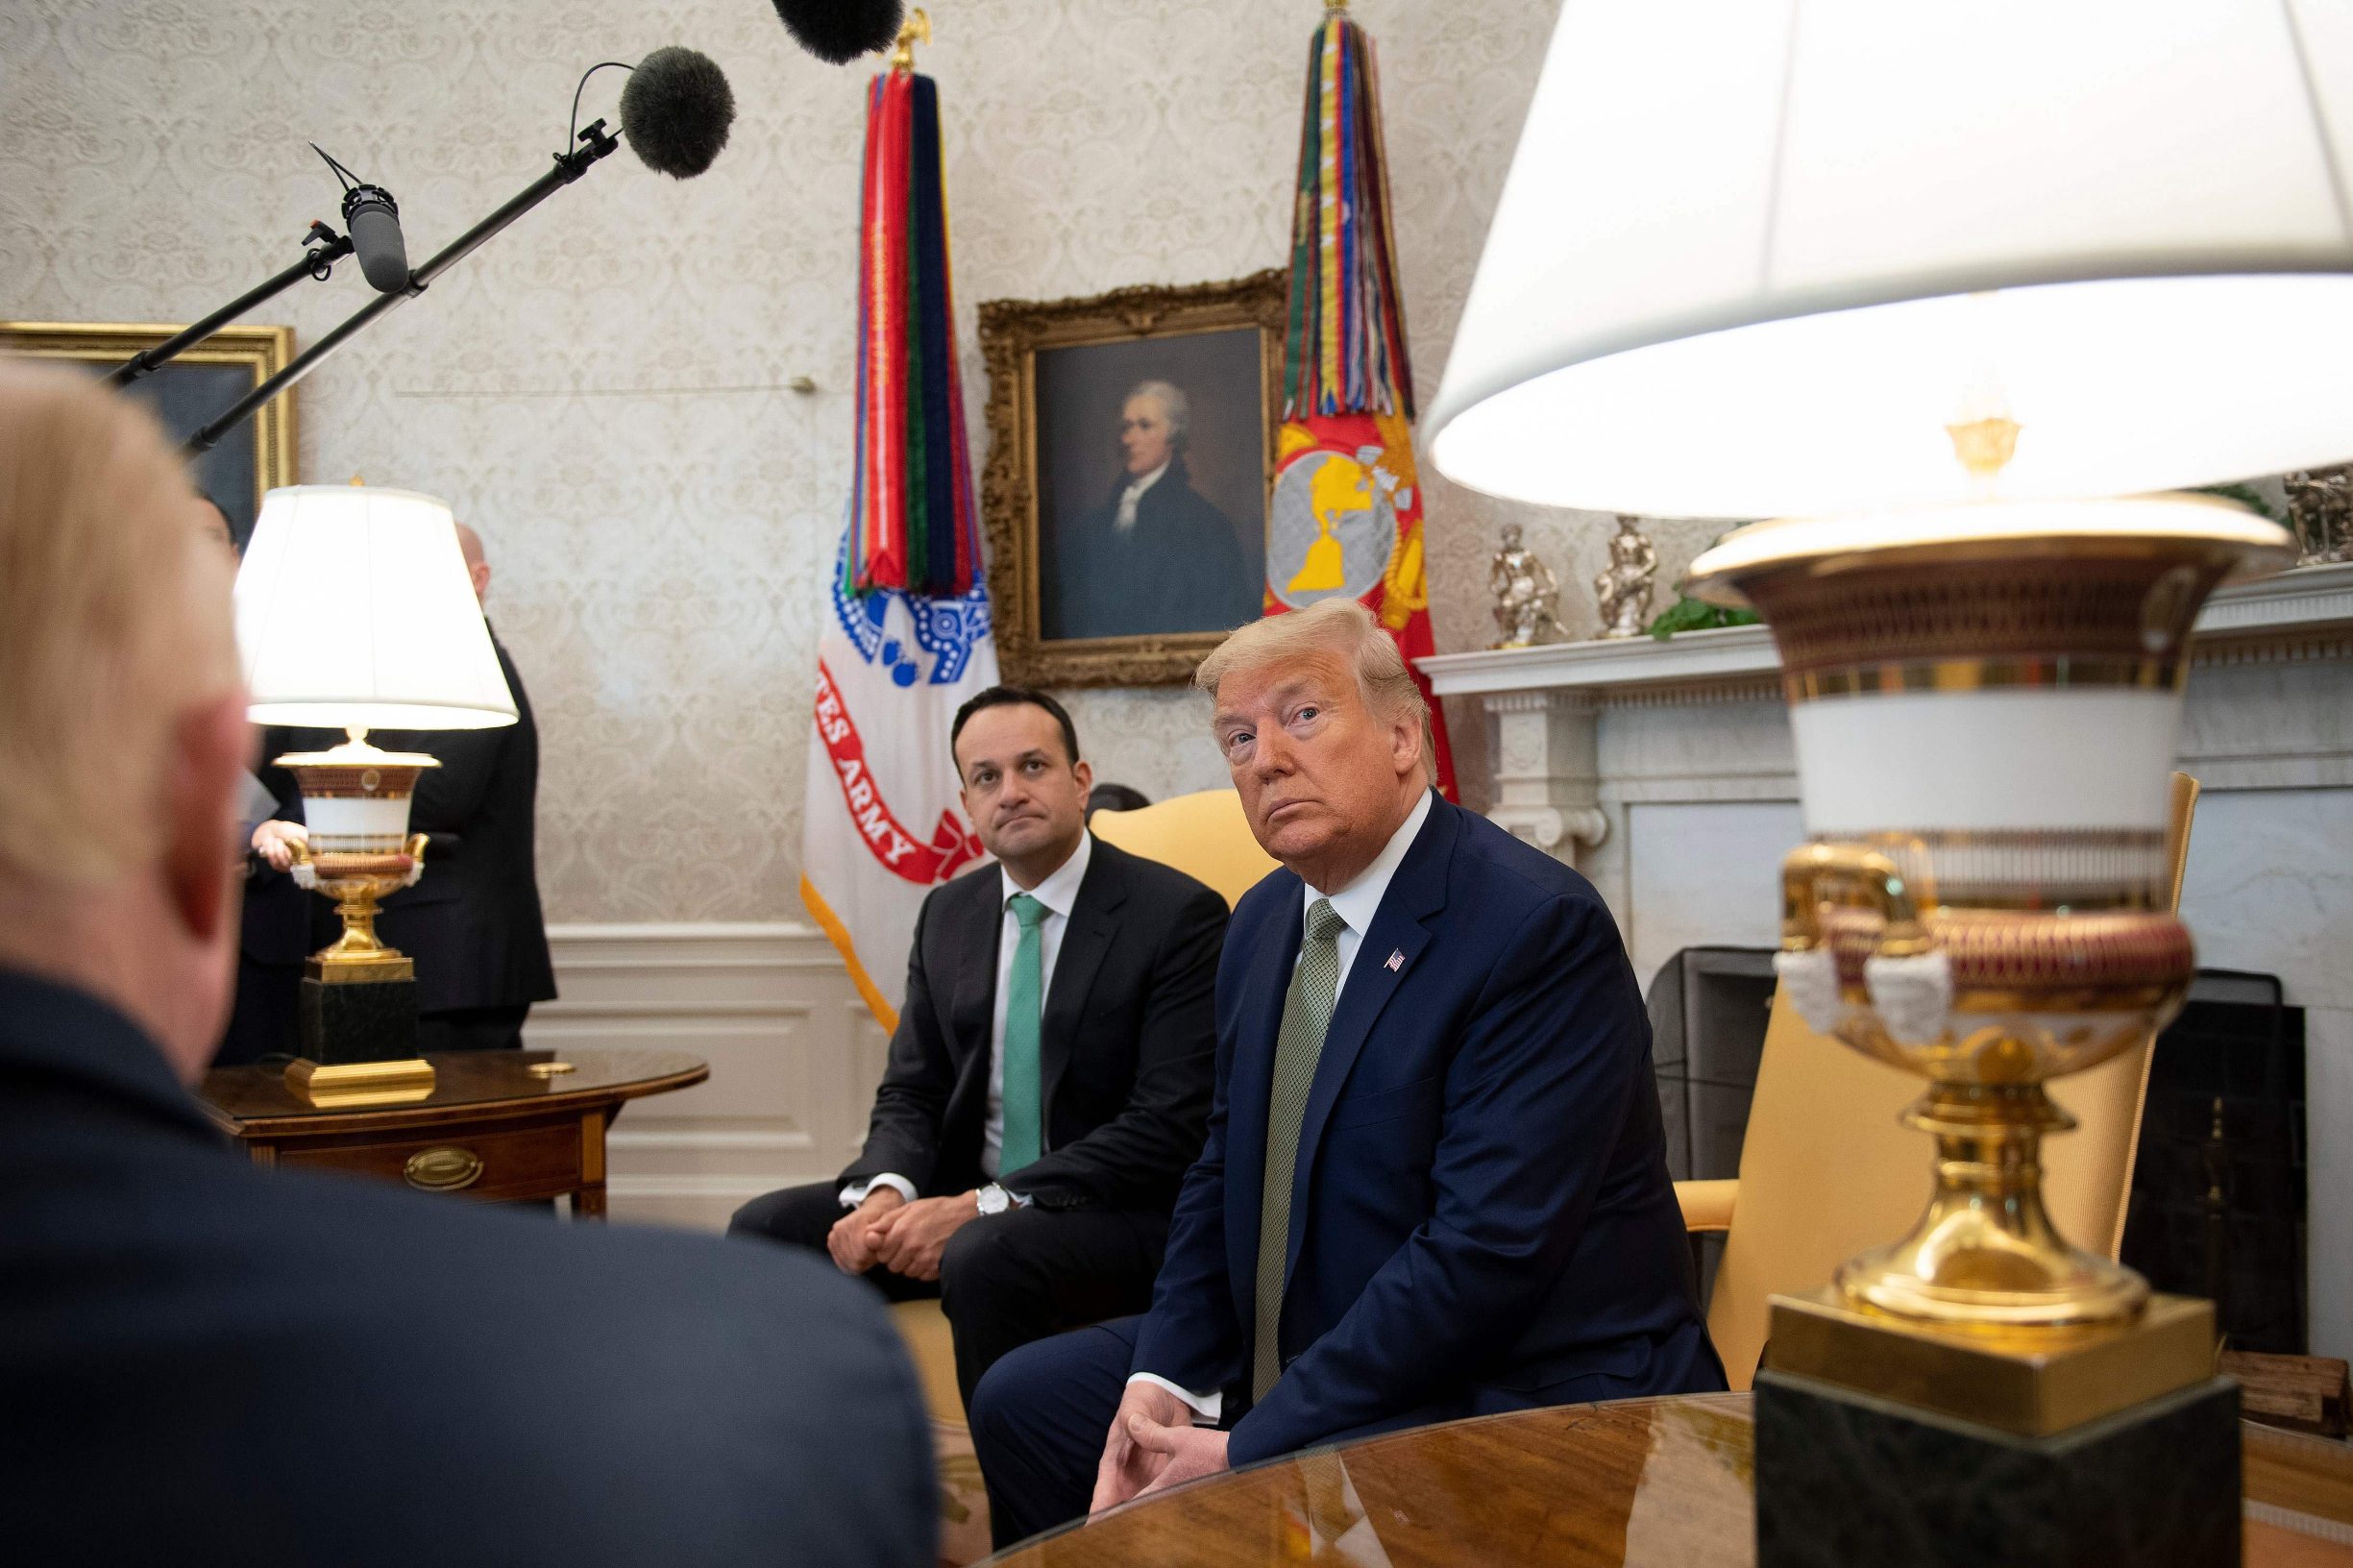 Ireland's Prime Minister Leo Varadkar and US President Donald Trump speak to the press before a meeting in the Oval Office of the White House March 12, 2020, in Washington, DC. - US President Donald Trump defended his decision to announce a suspension on arrivals from the EU without informing European governments, telling reporters Thursday there wasn't enough time.His remarks came after the presidents of the European Commission and European Council reacted with anger to the suspension Trump announced 